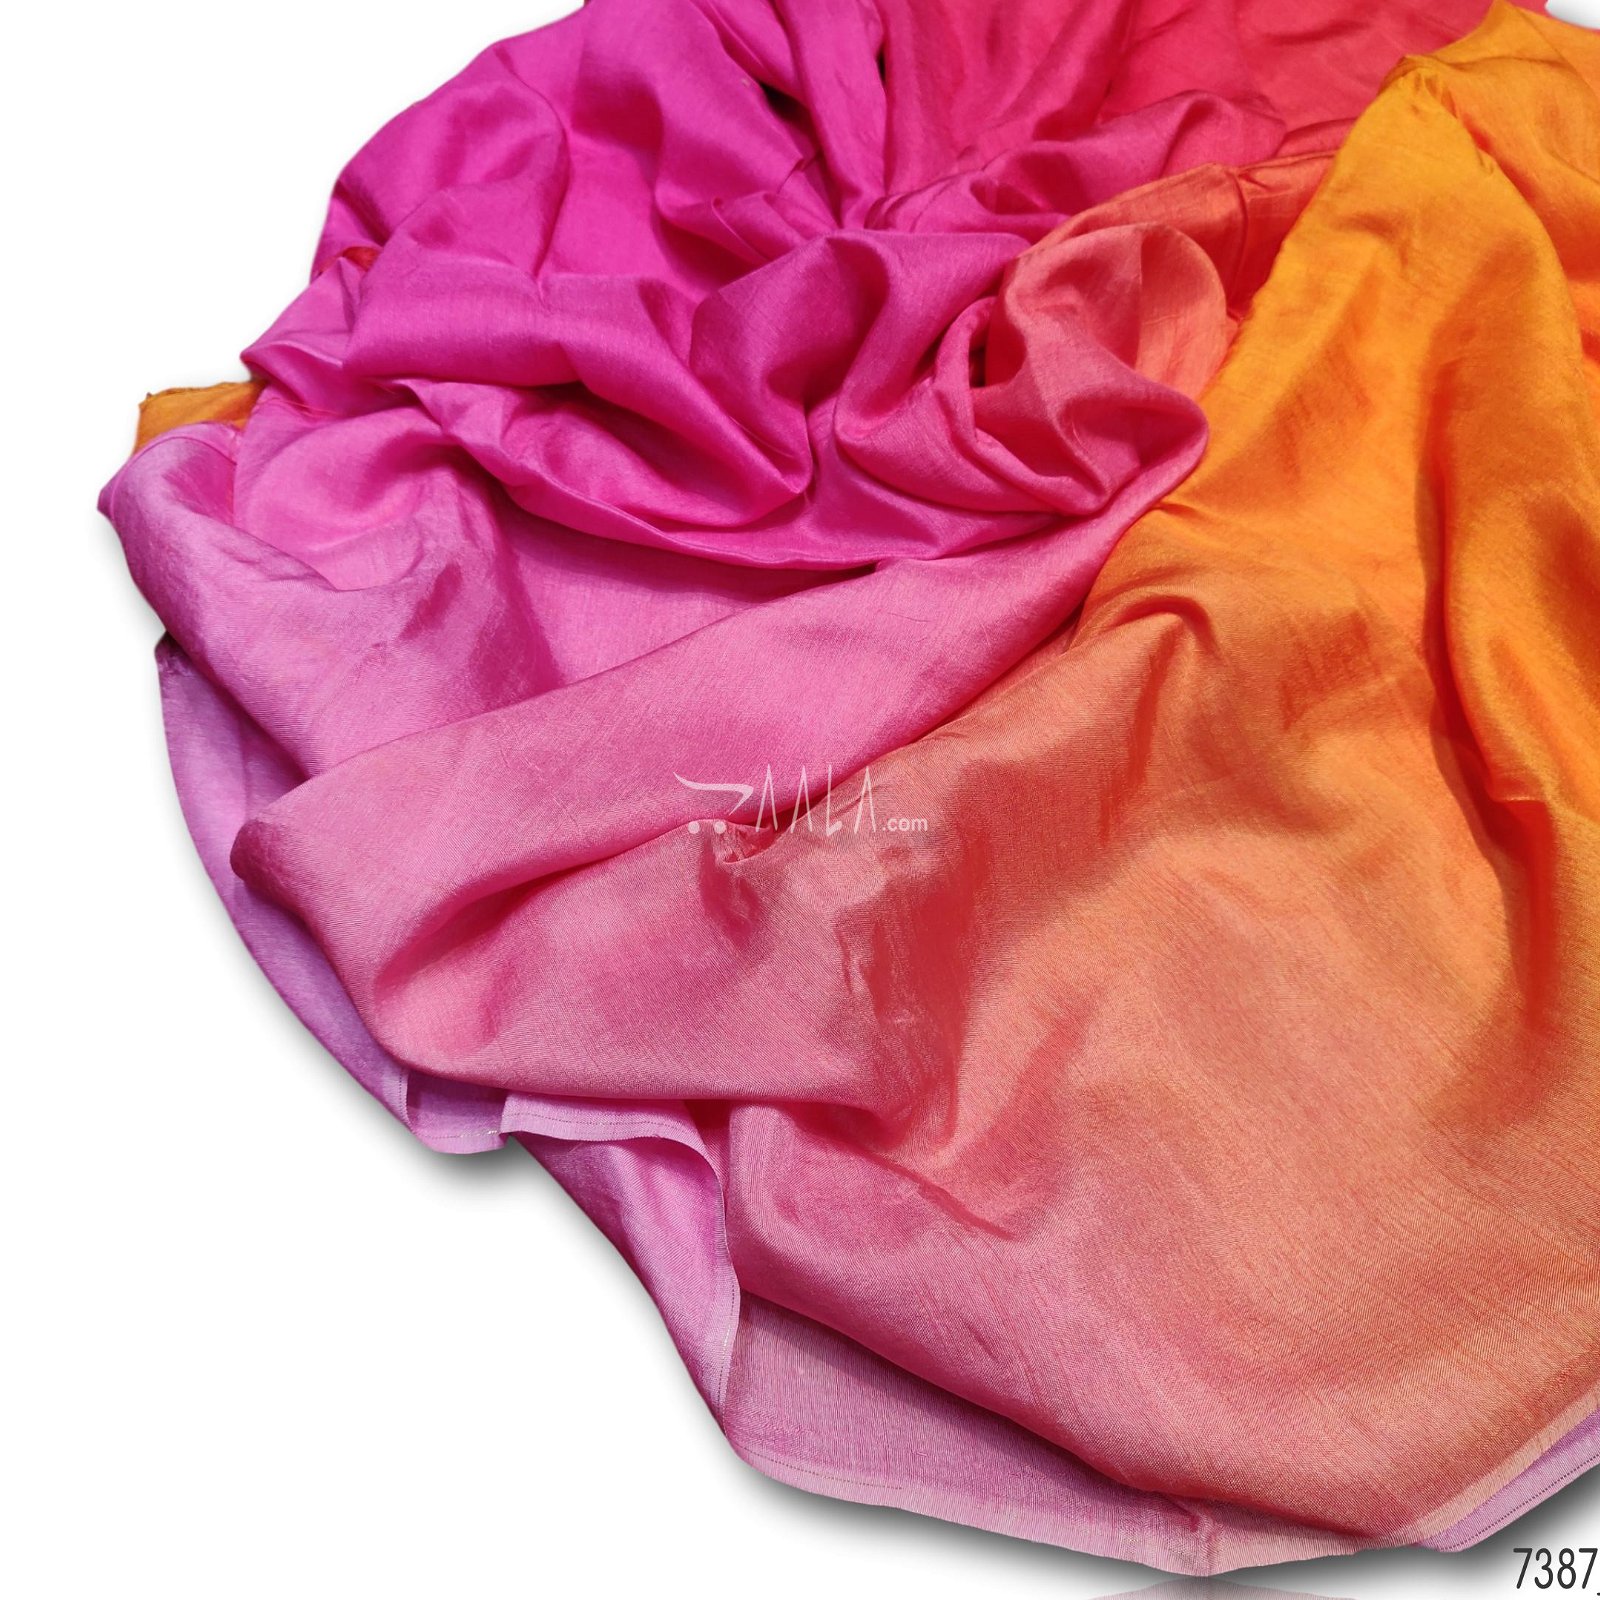 4D-Shaded Raw-Silk Viscose 44-Inches ASSORTED Per-Metre #7387
